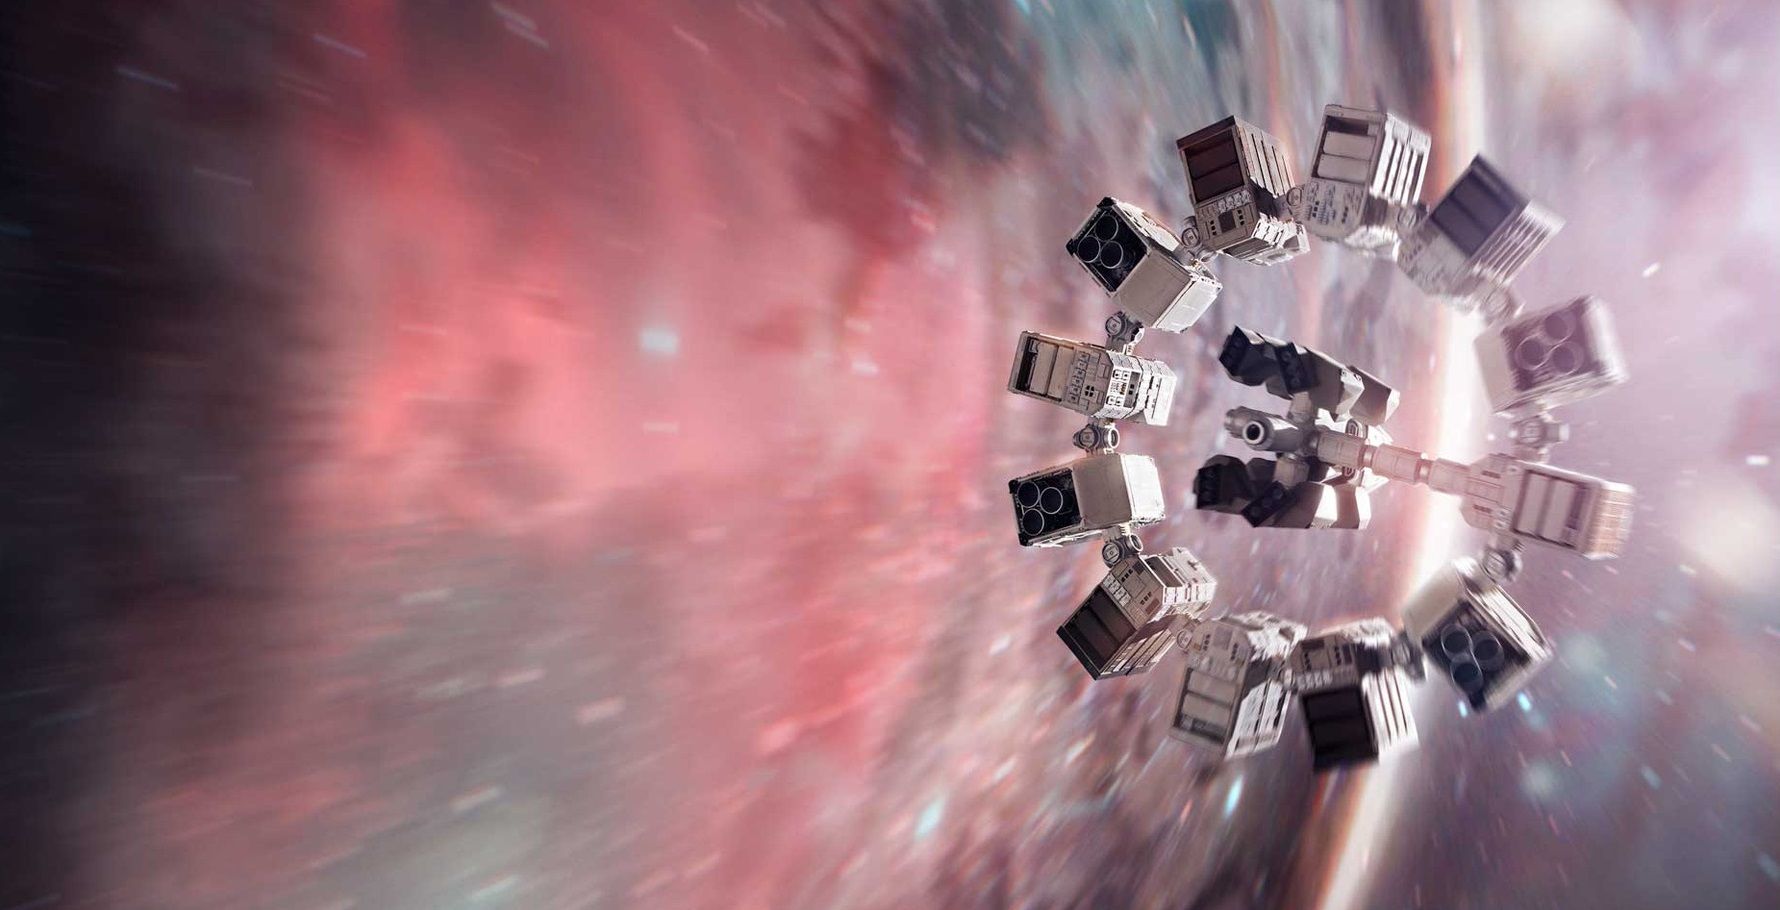 10 ThoughtProvoking Behind The Scenes Facts About Interstellar